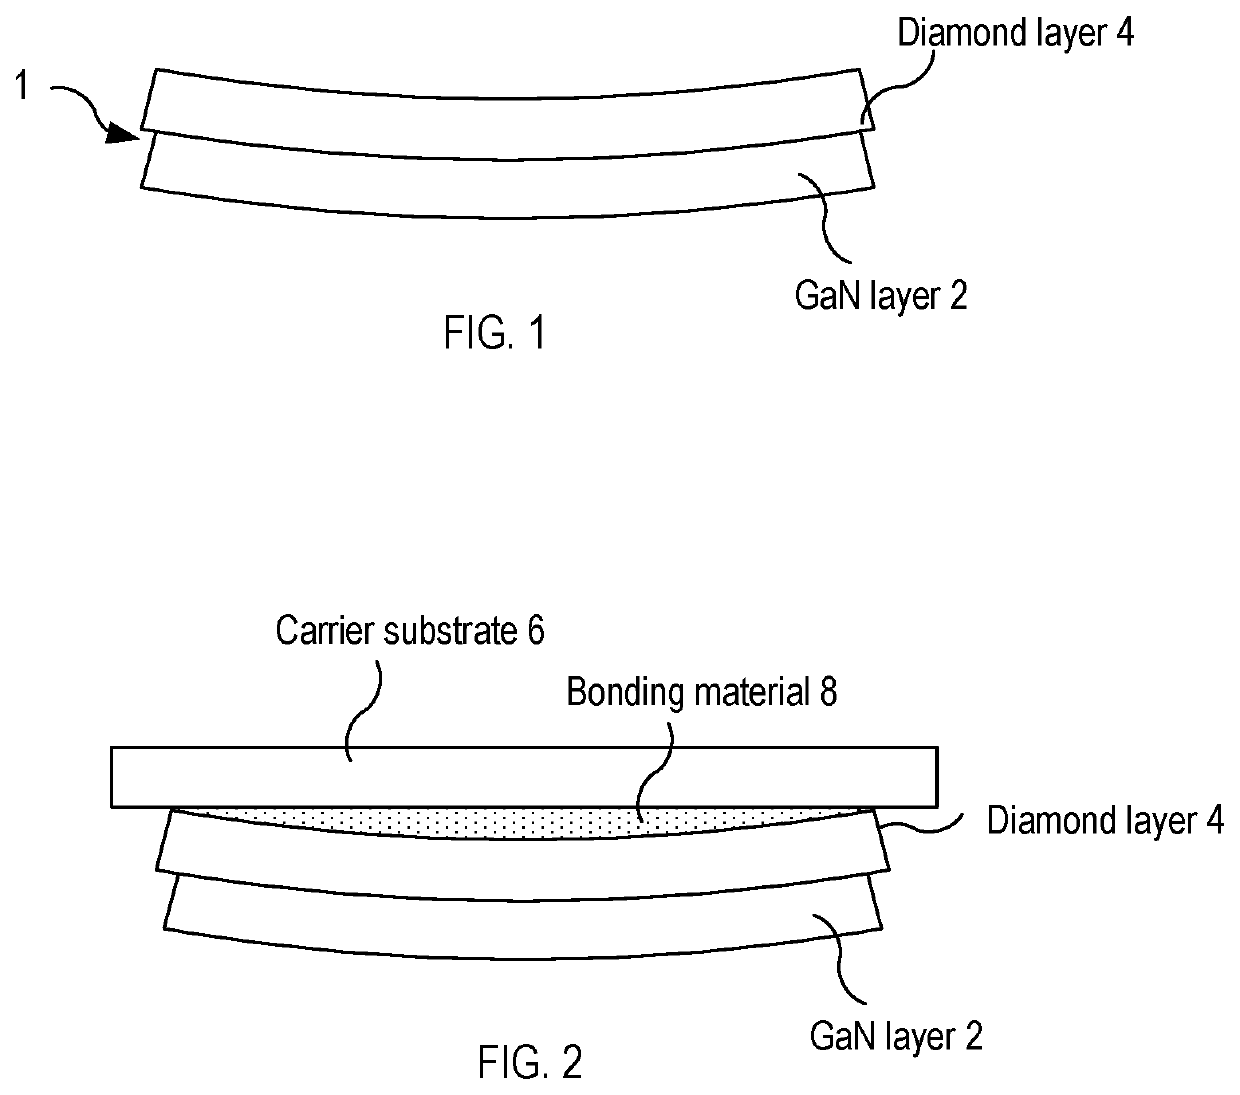 Mounting of semiconductor-on-diamond wafers for device processing